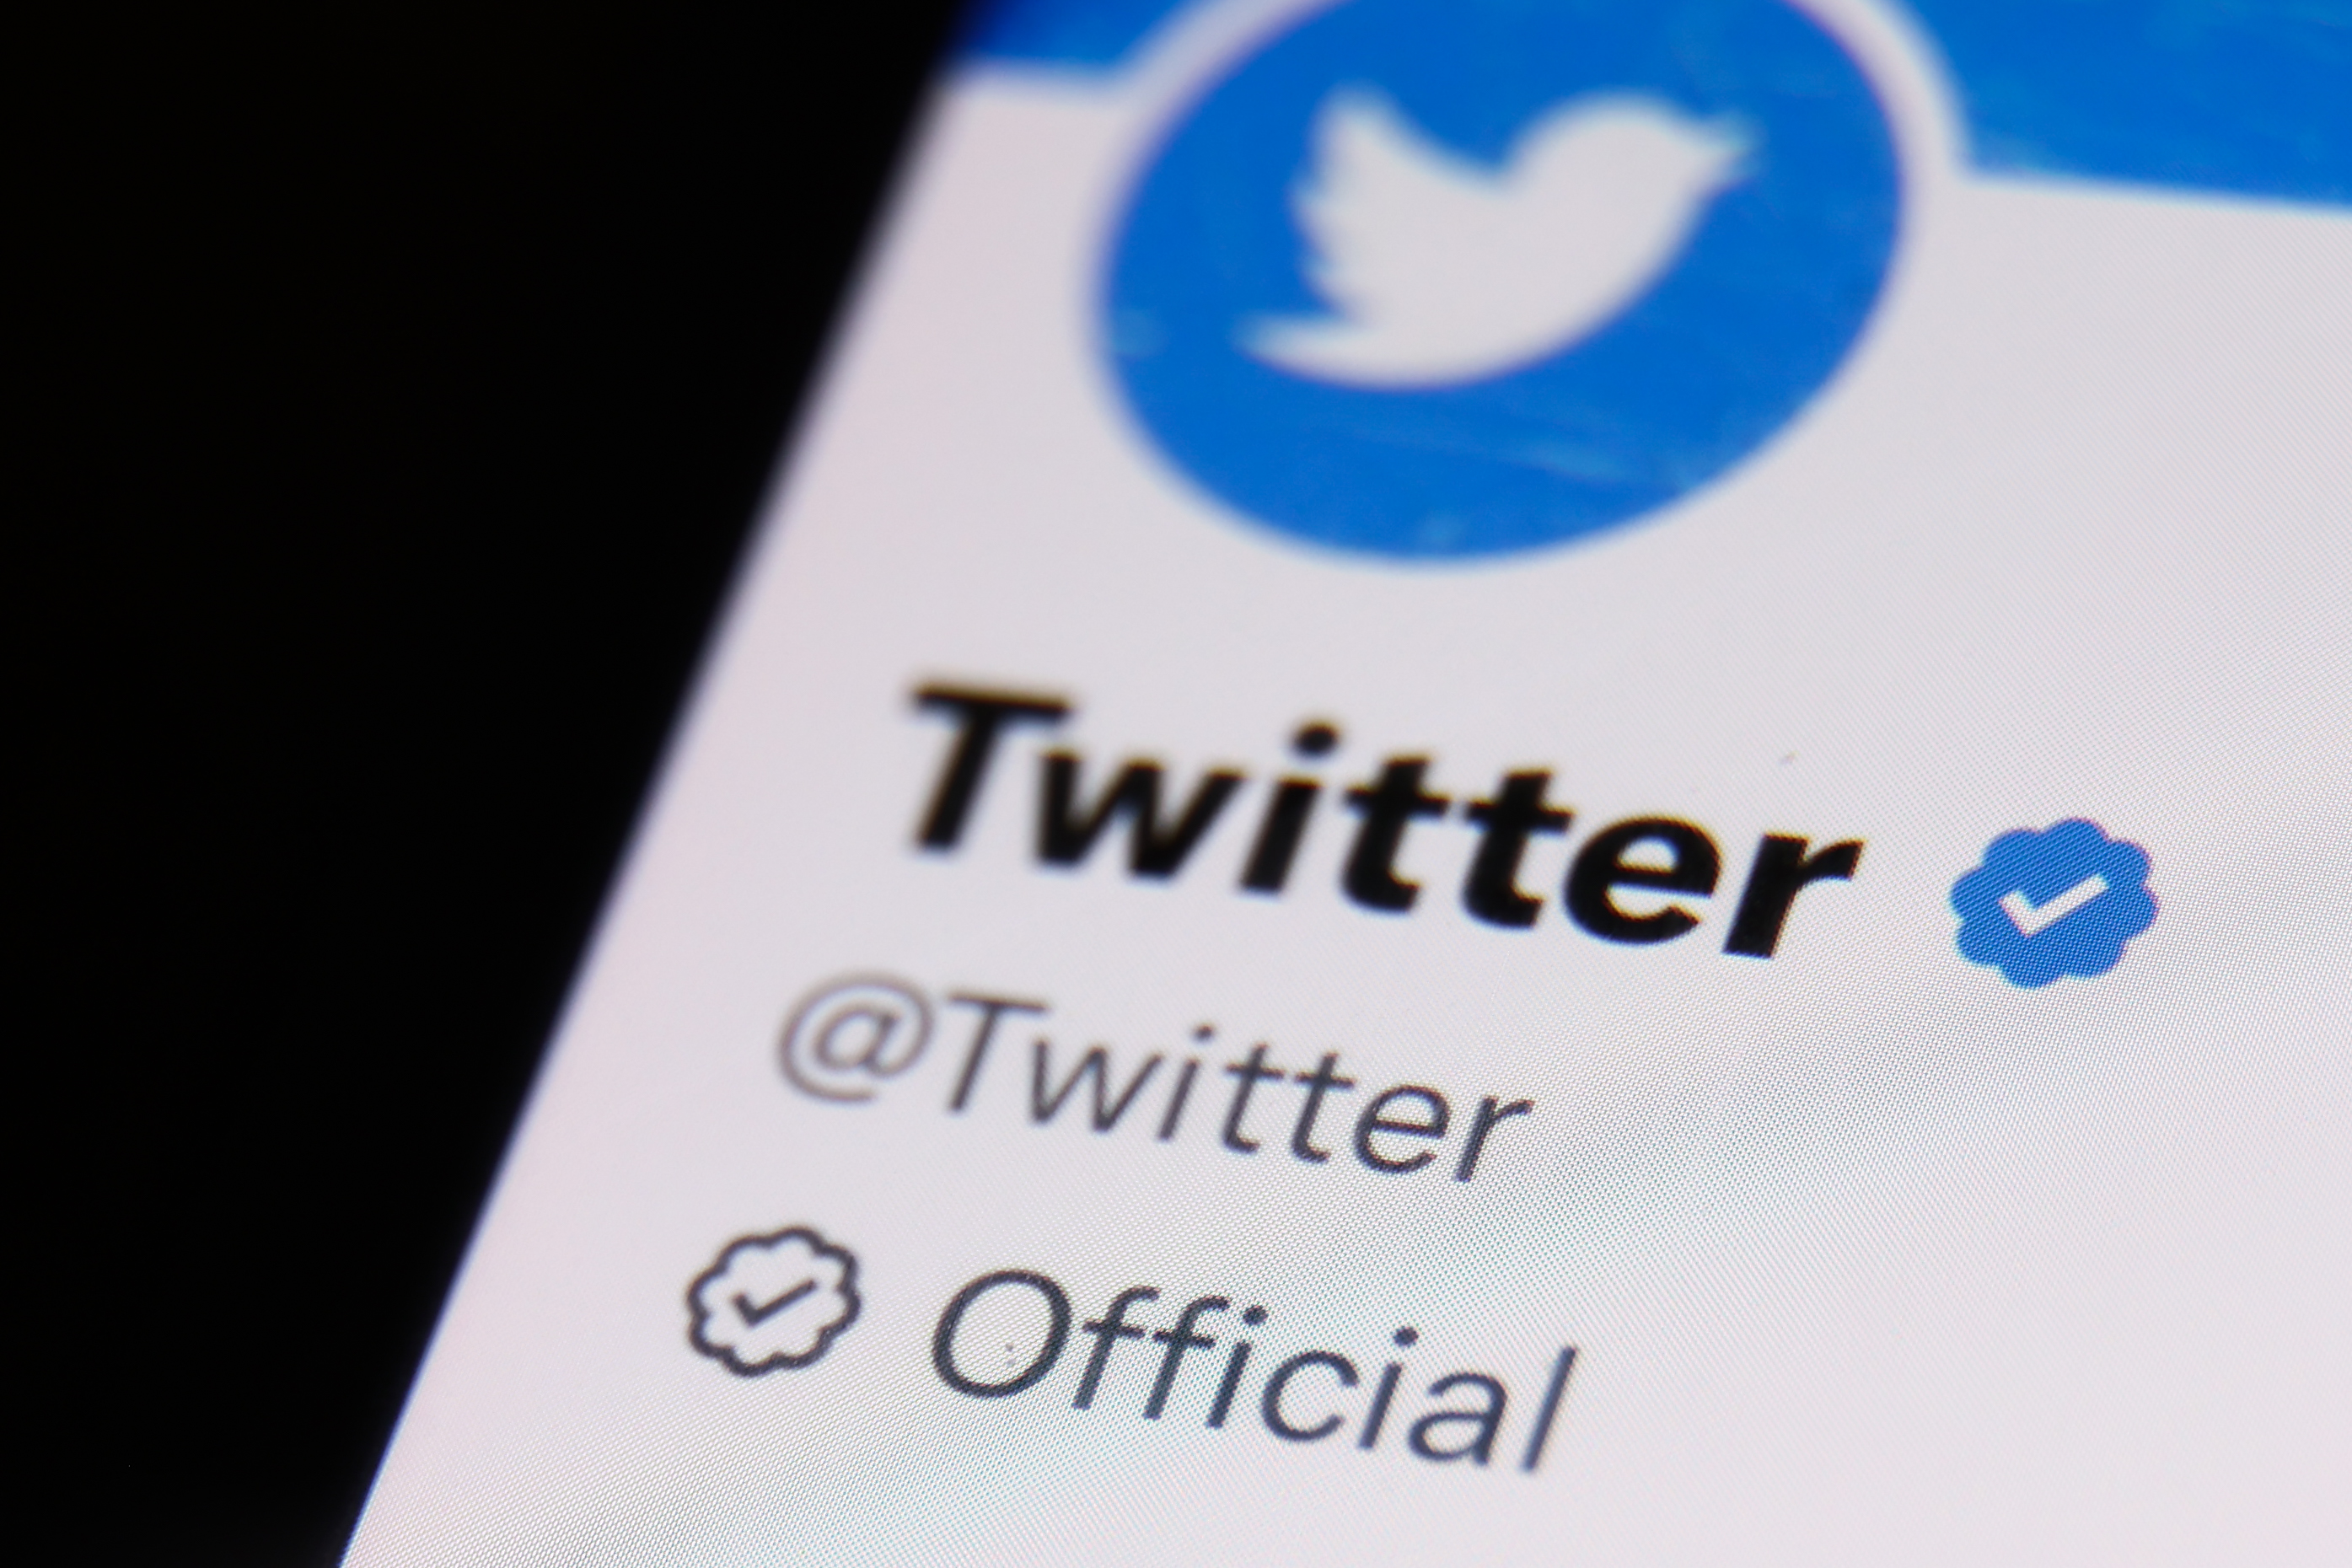 Twitter’s new Verified service will embody gold checks for firms, Elon Musk confirms | Engadget